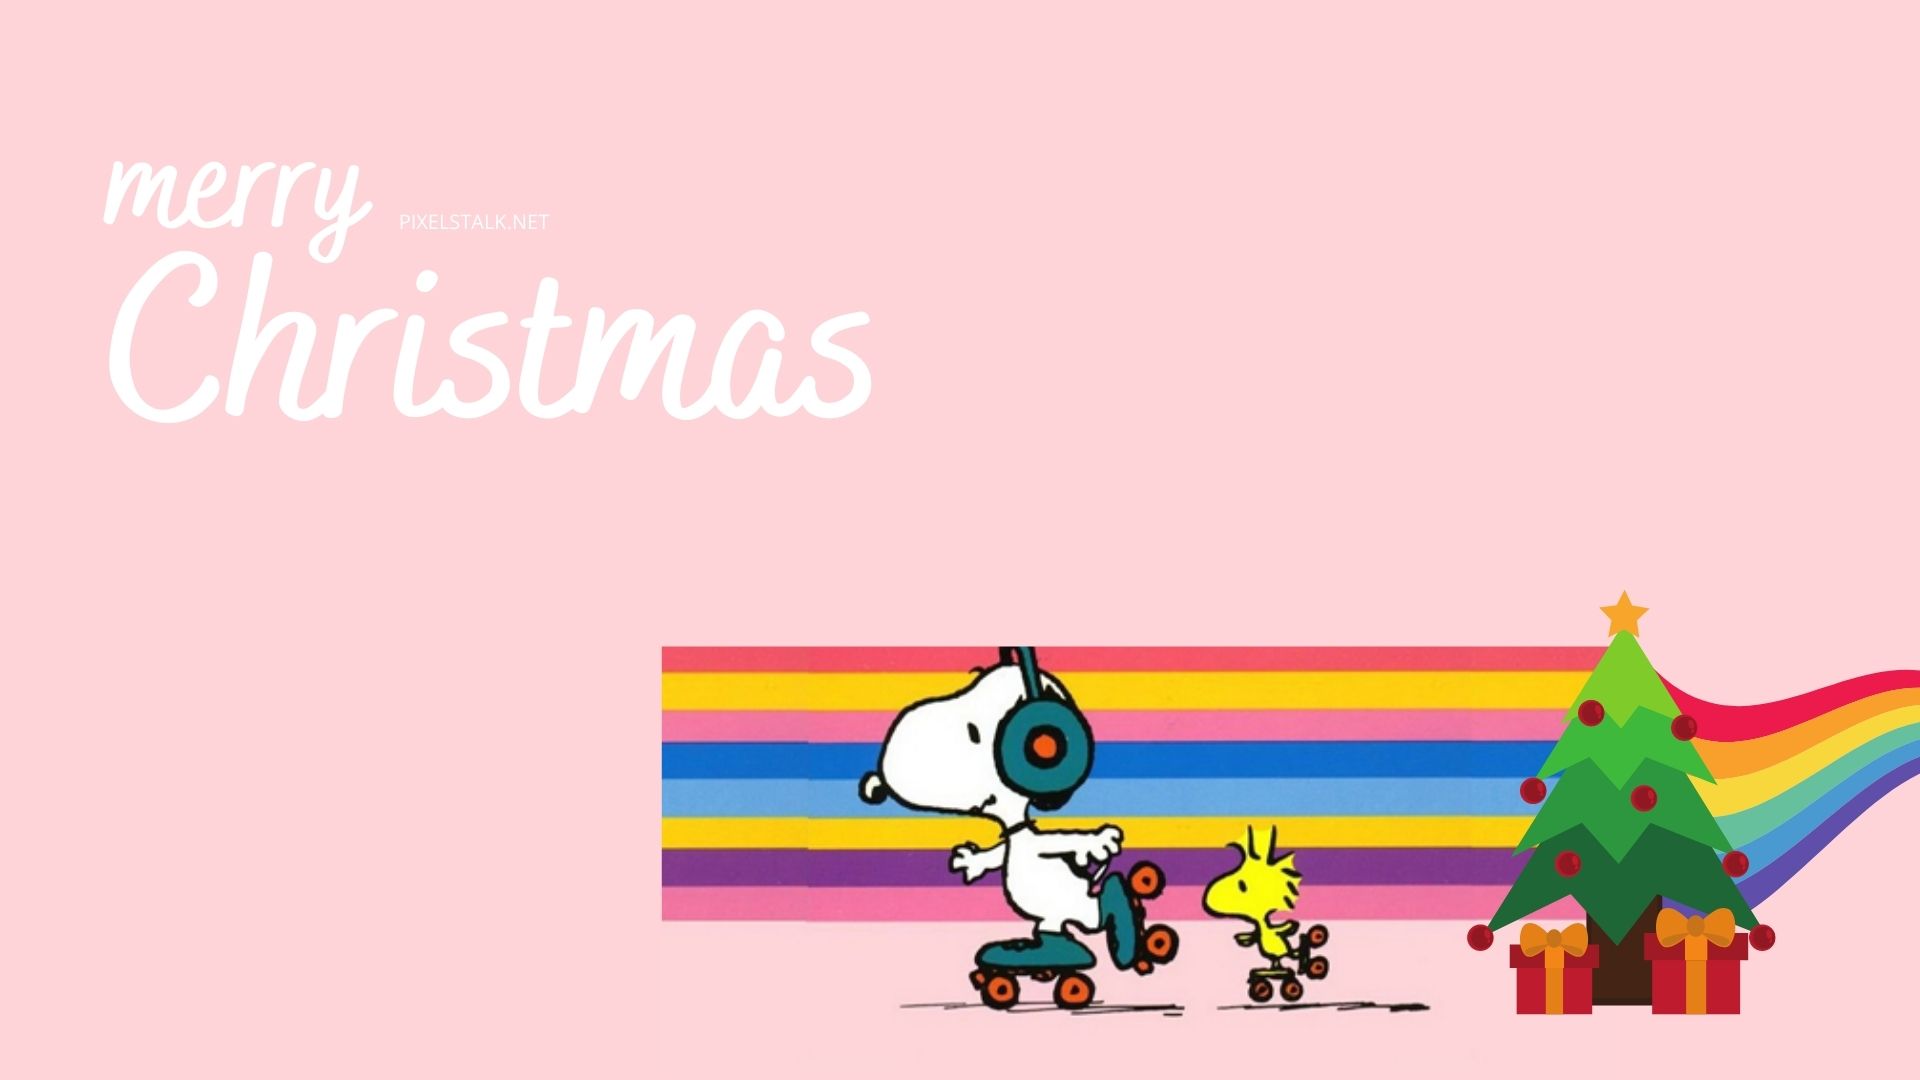 Snoopy Christmas Wallpaper For Computer 56 images